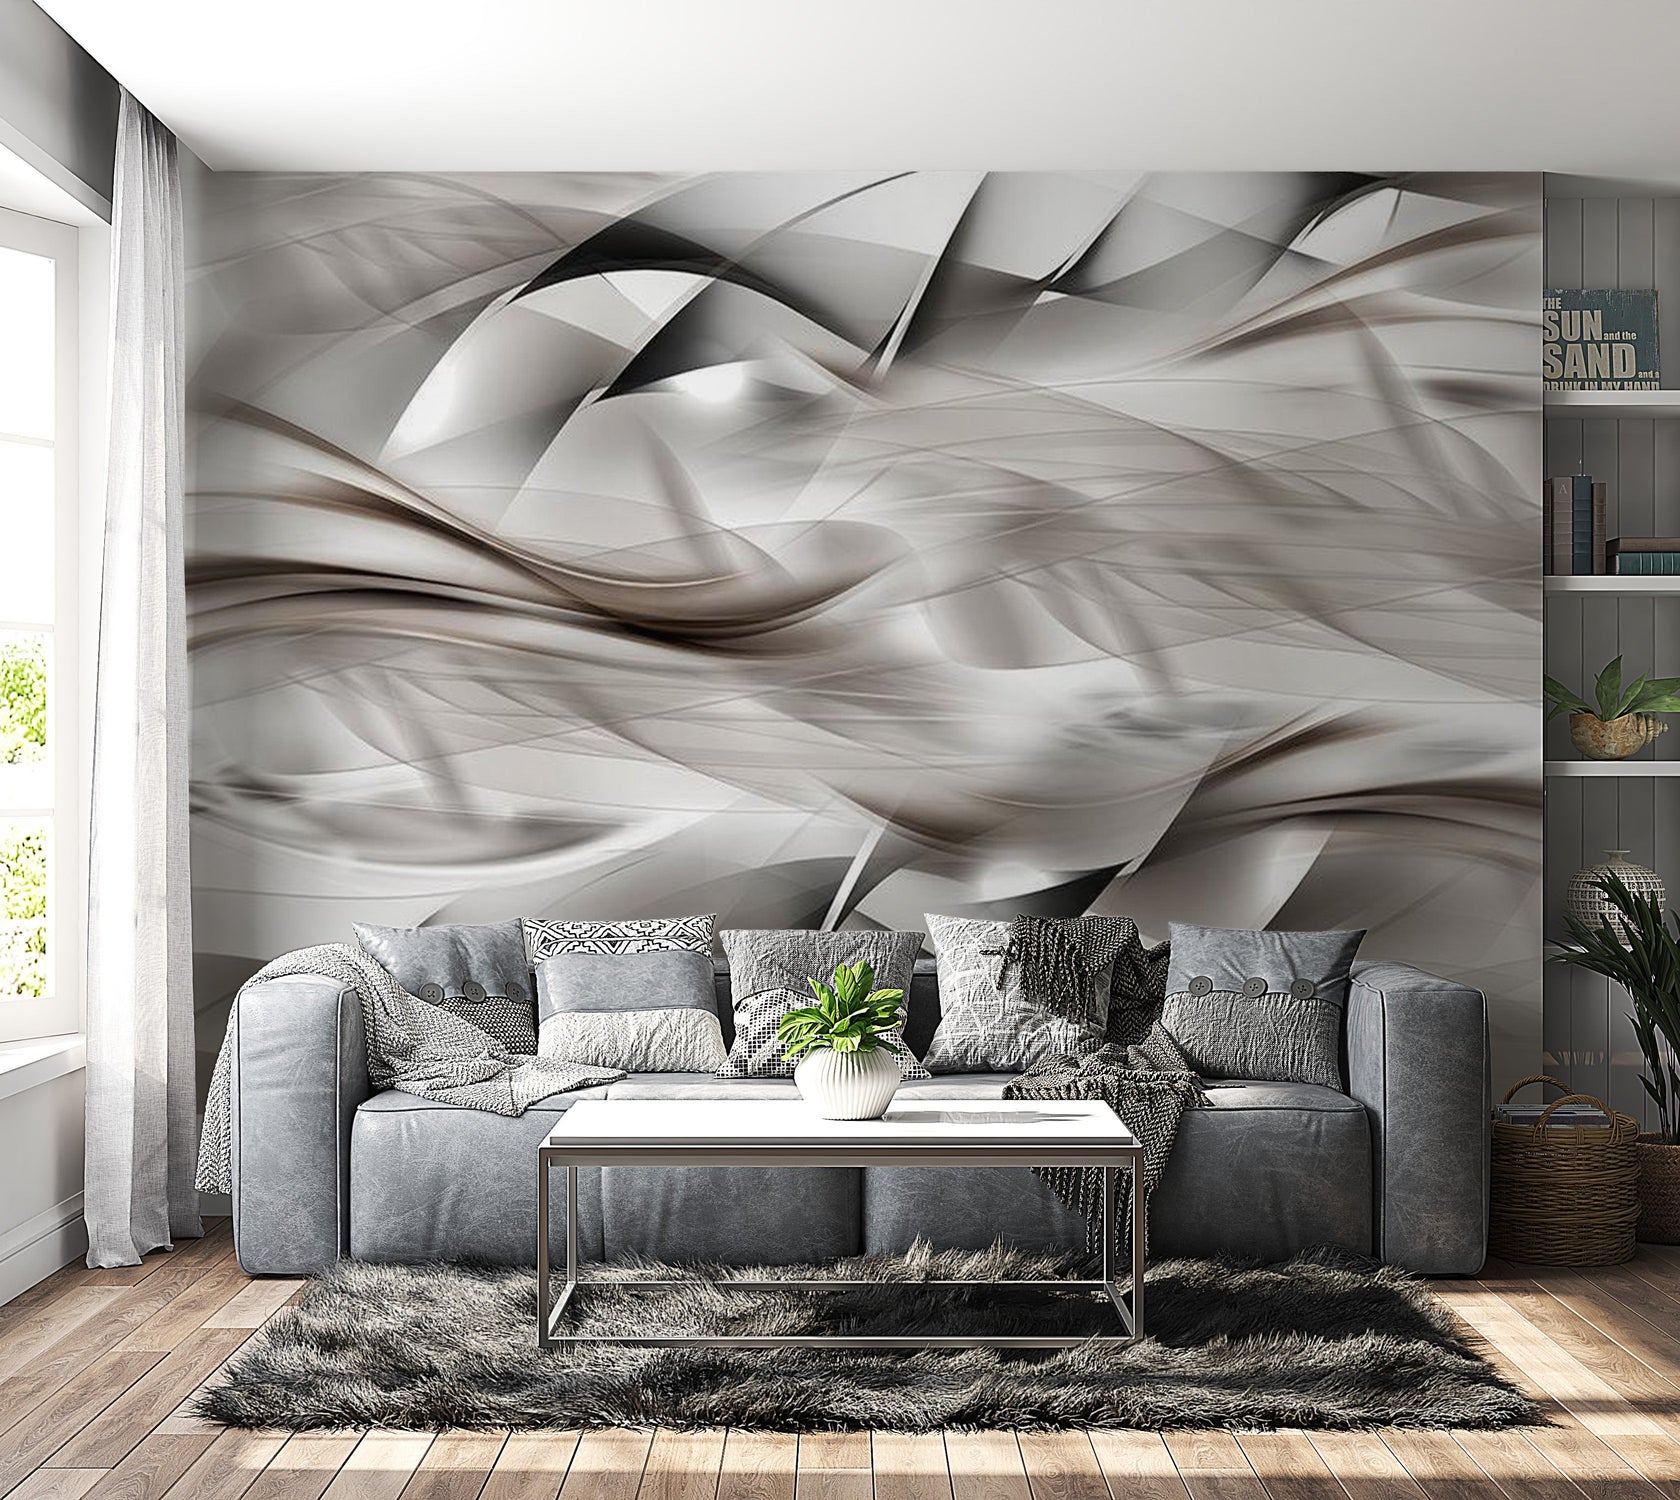 Peel & Stick Glam Wall Mural - Abstract Braid - Removable Wall Decals